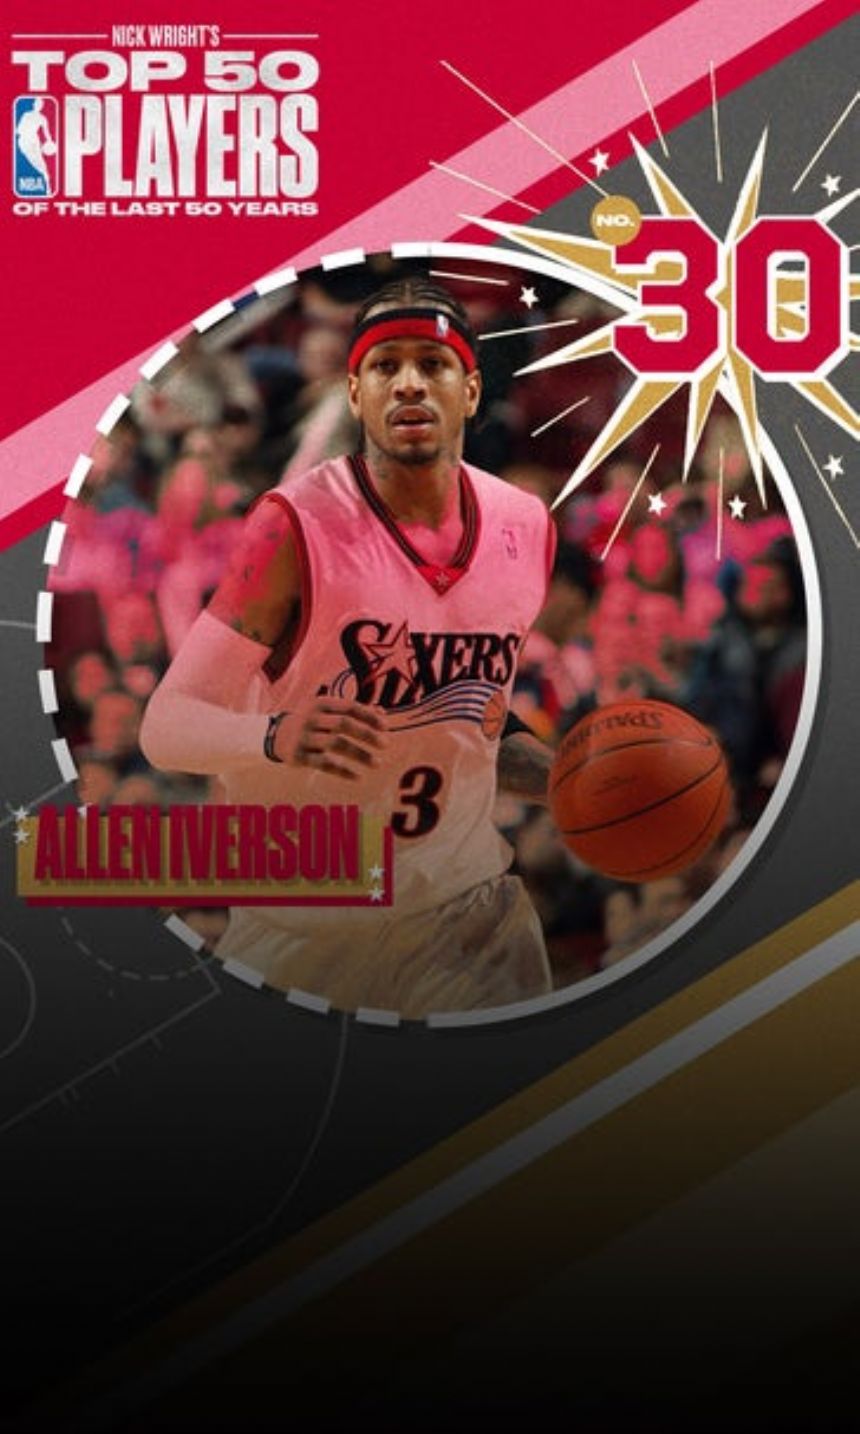 Top 50 NBA players from last 50 years: Allen Iverson ranks No. 30